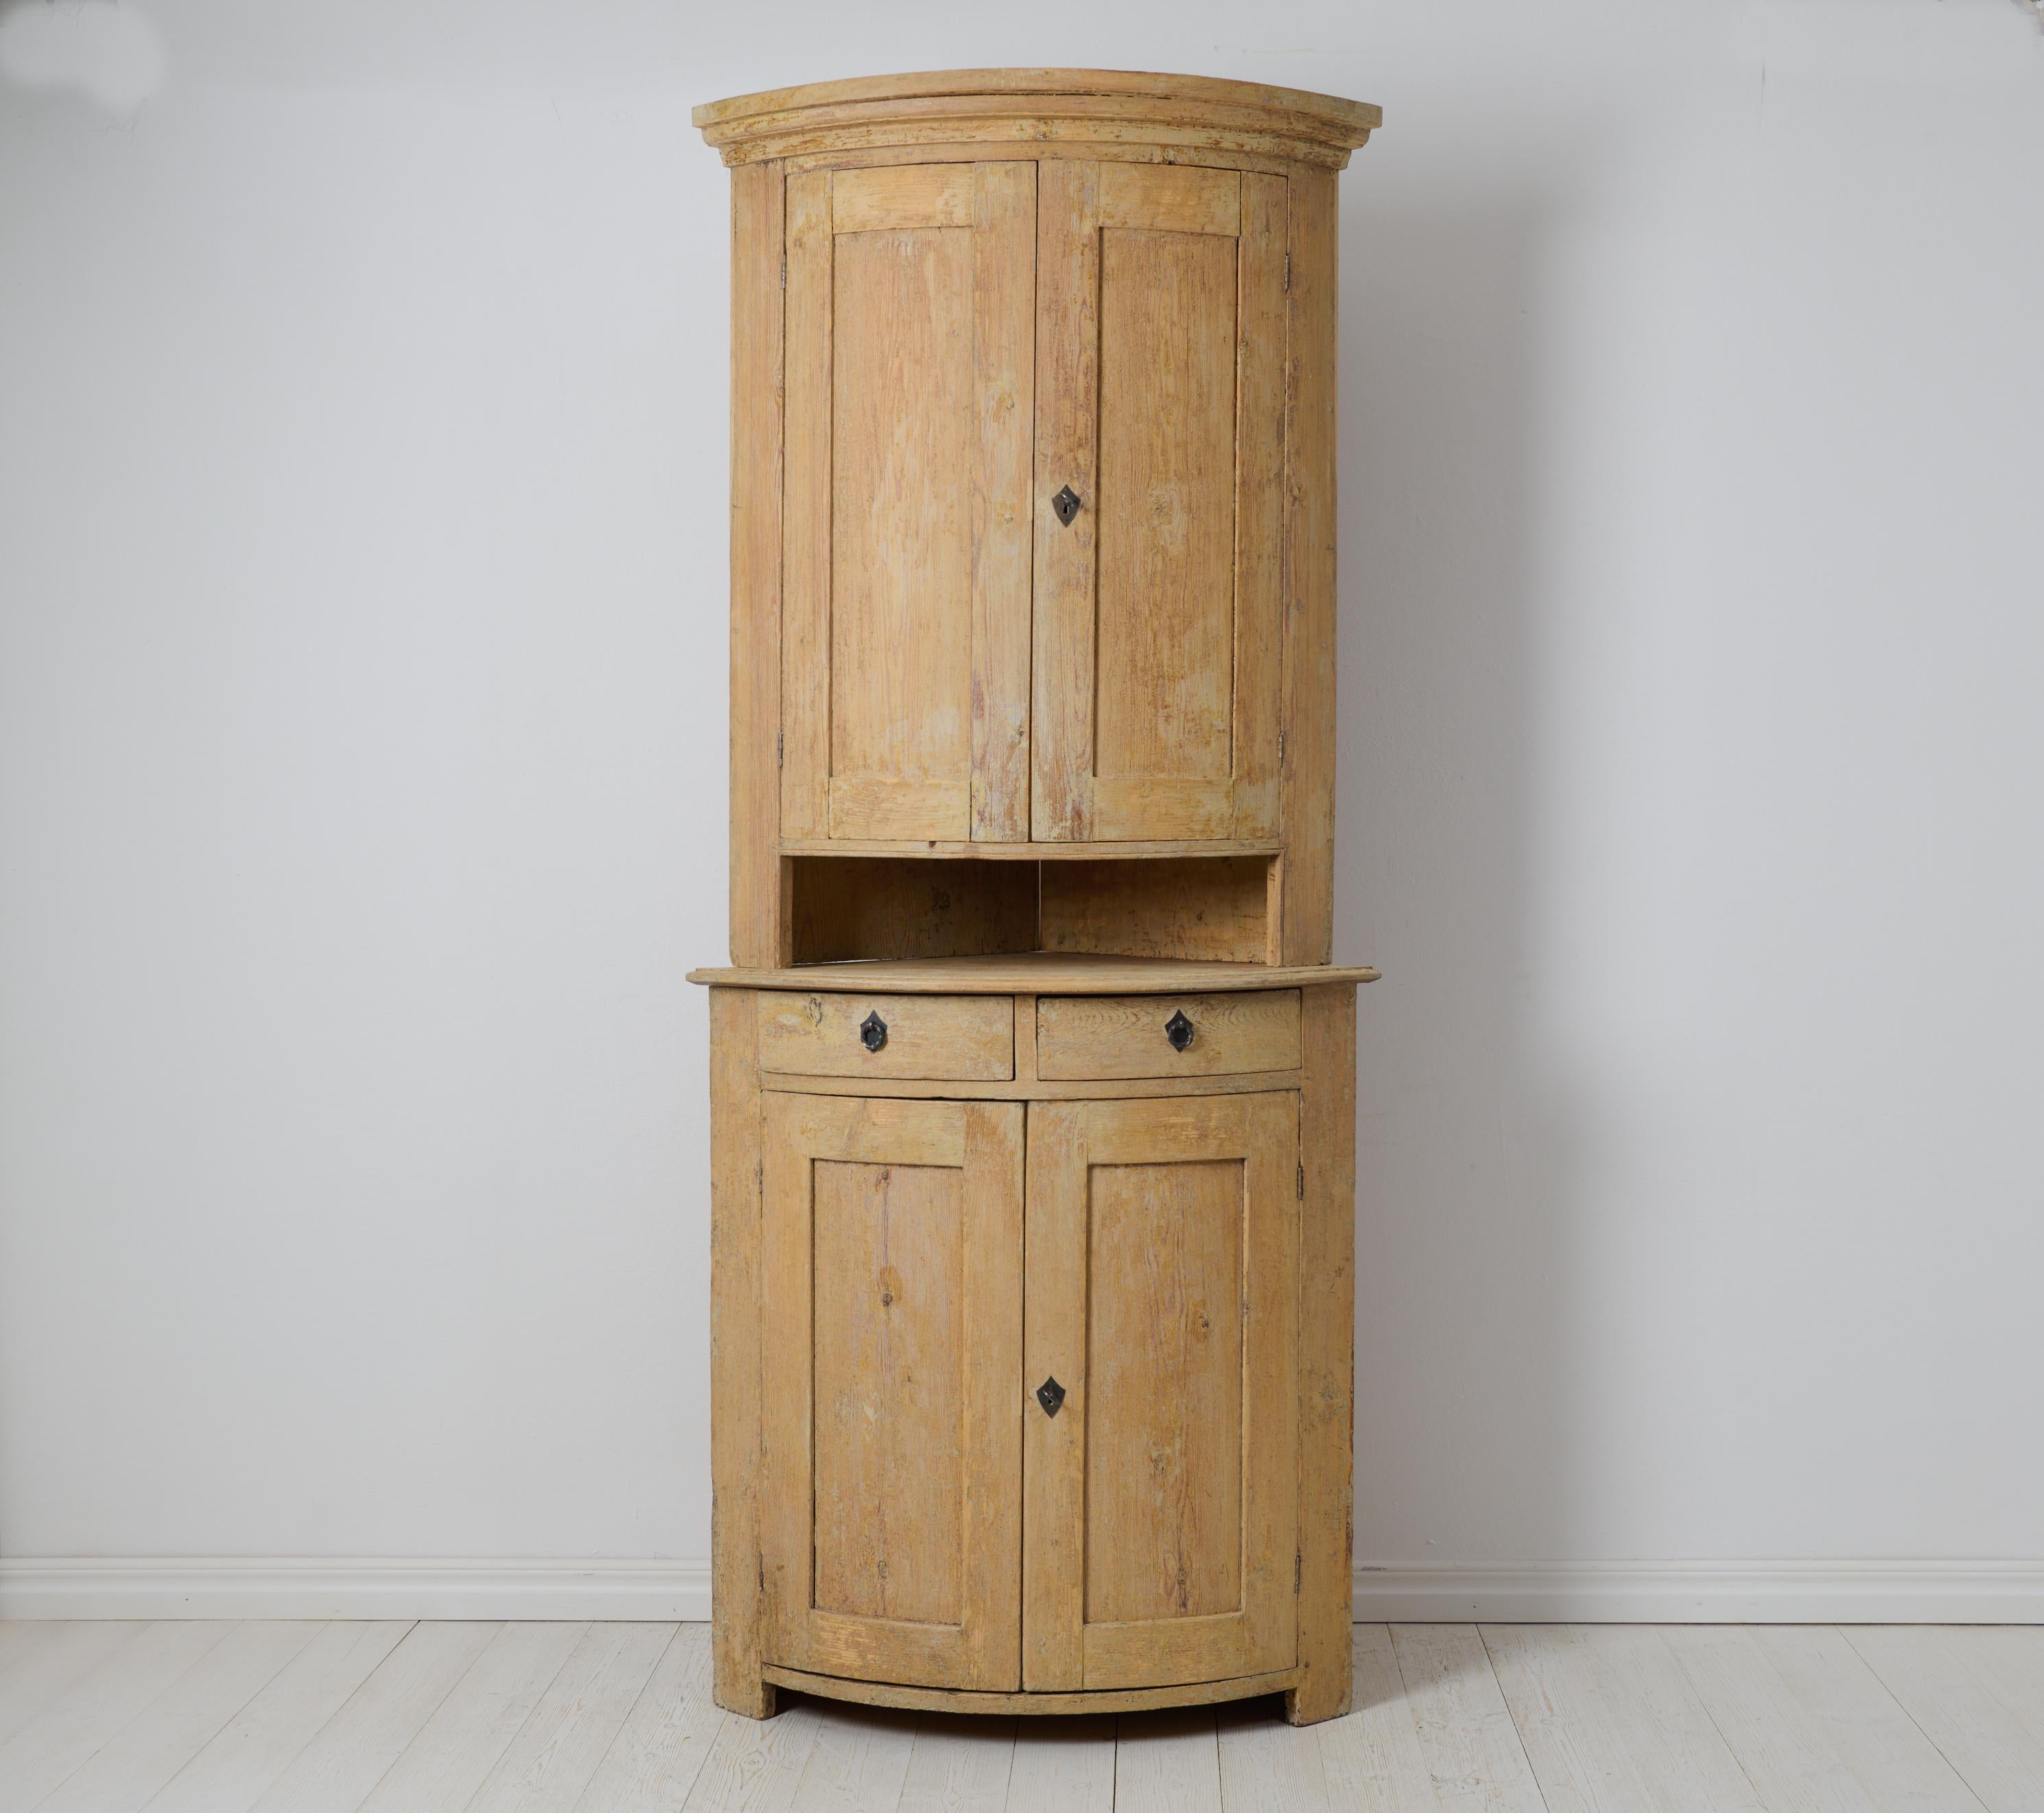 Hand-Crafted Antique Genuine Northern Swedish Country Gustavian Style Rustic Corner Cabinet For Sale